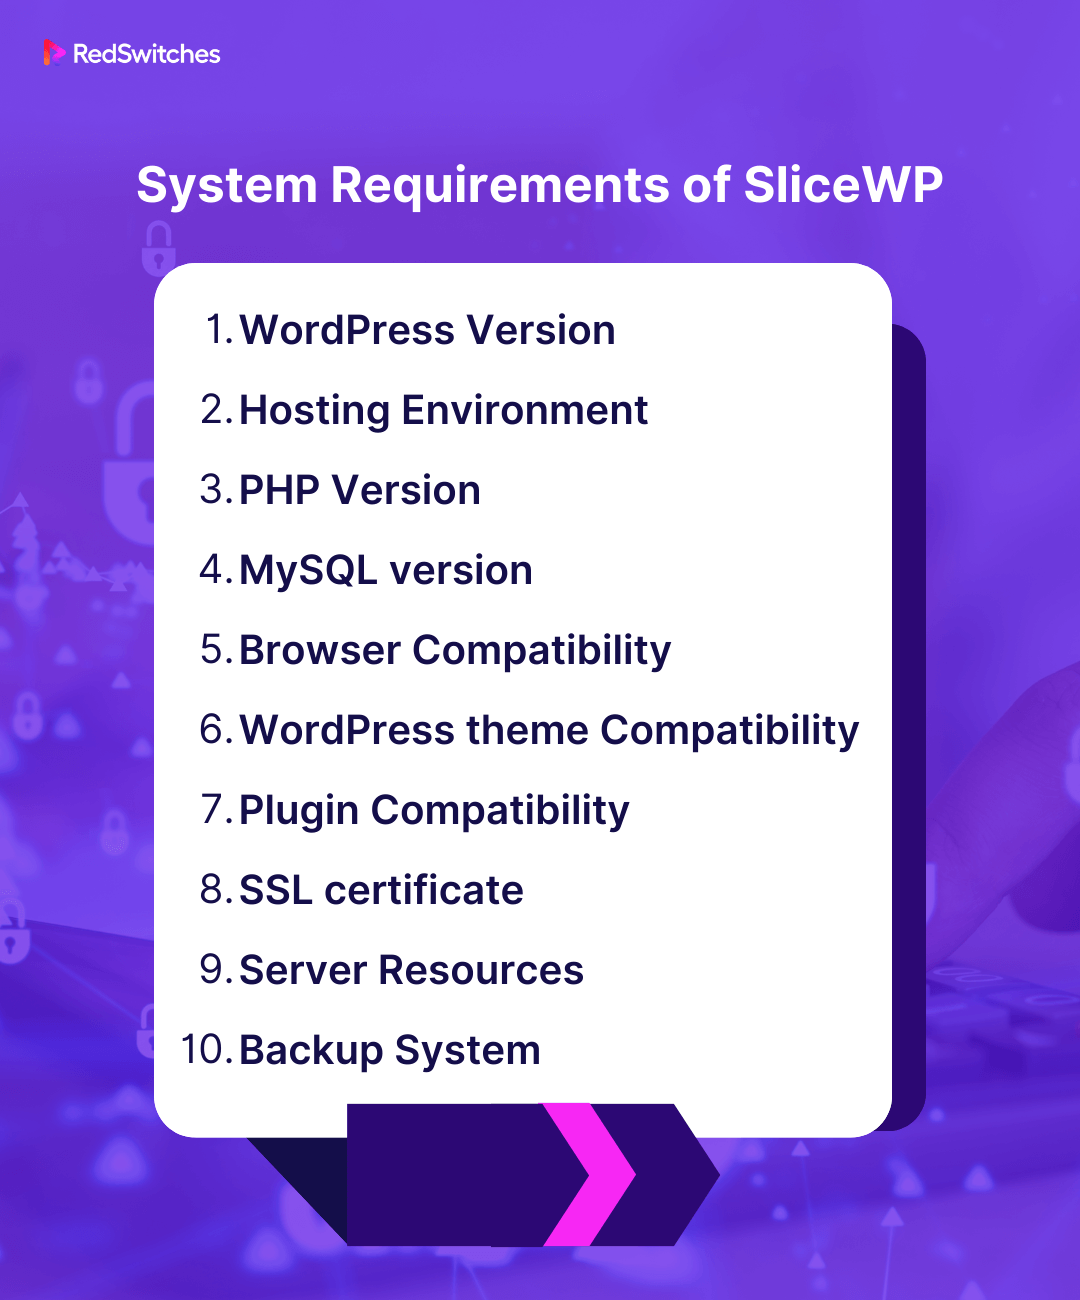 System Requirements of SliceWP